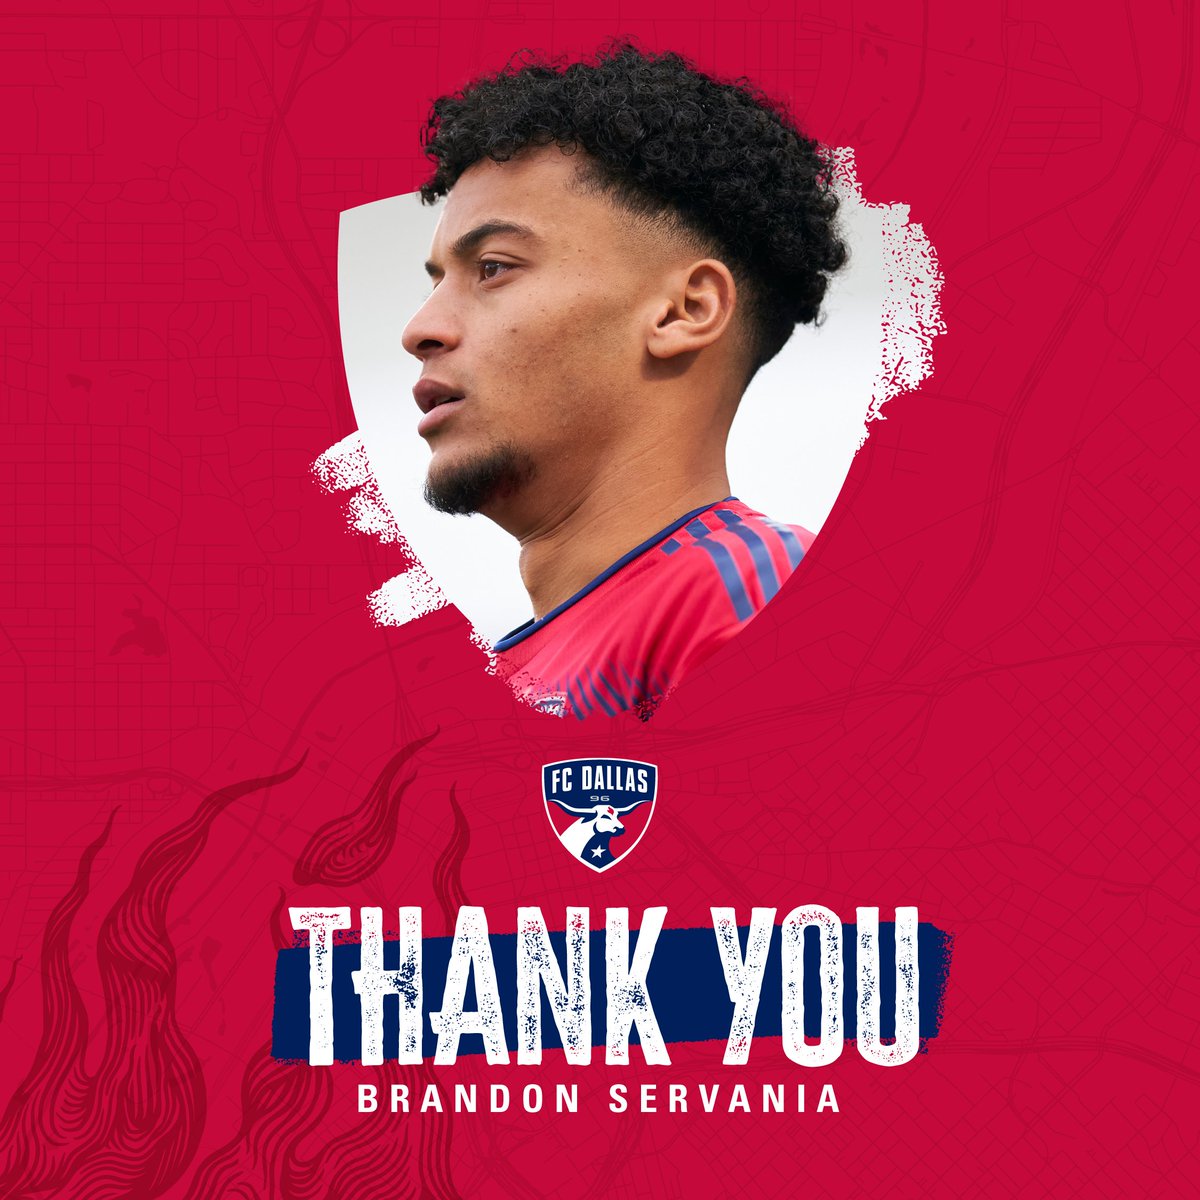 A Homegrown through and through with an incredible personality on and off the field. We're grateful for every memory and moment. Thank you for everything, Brandon ❤️💙